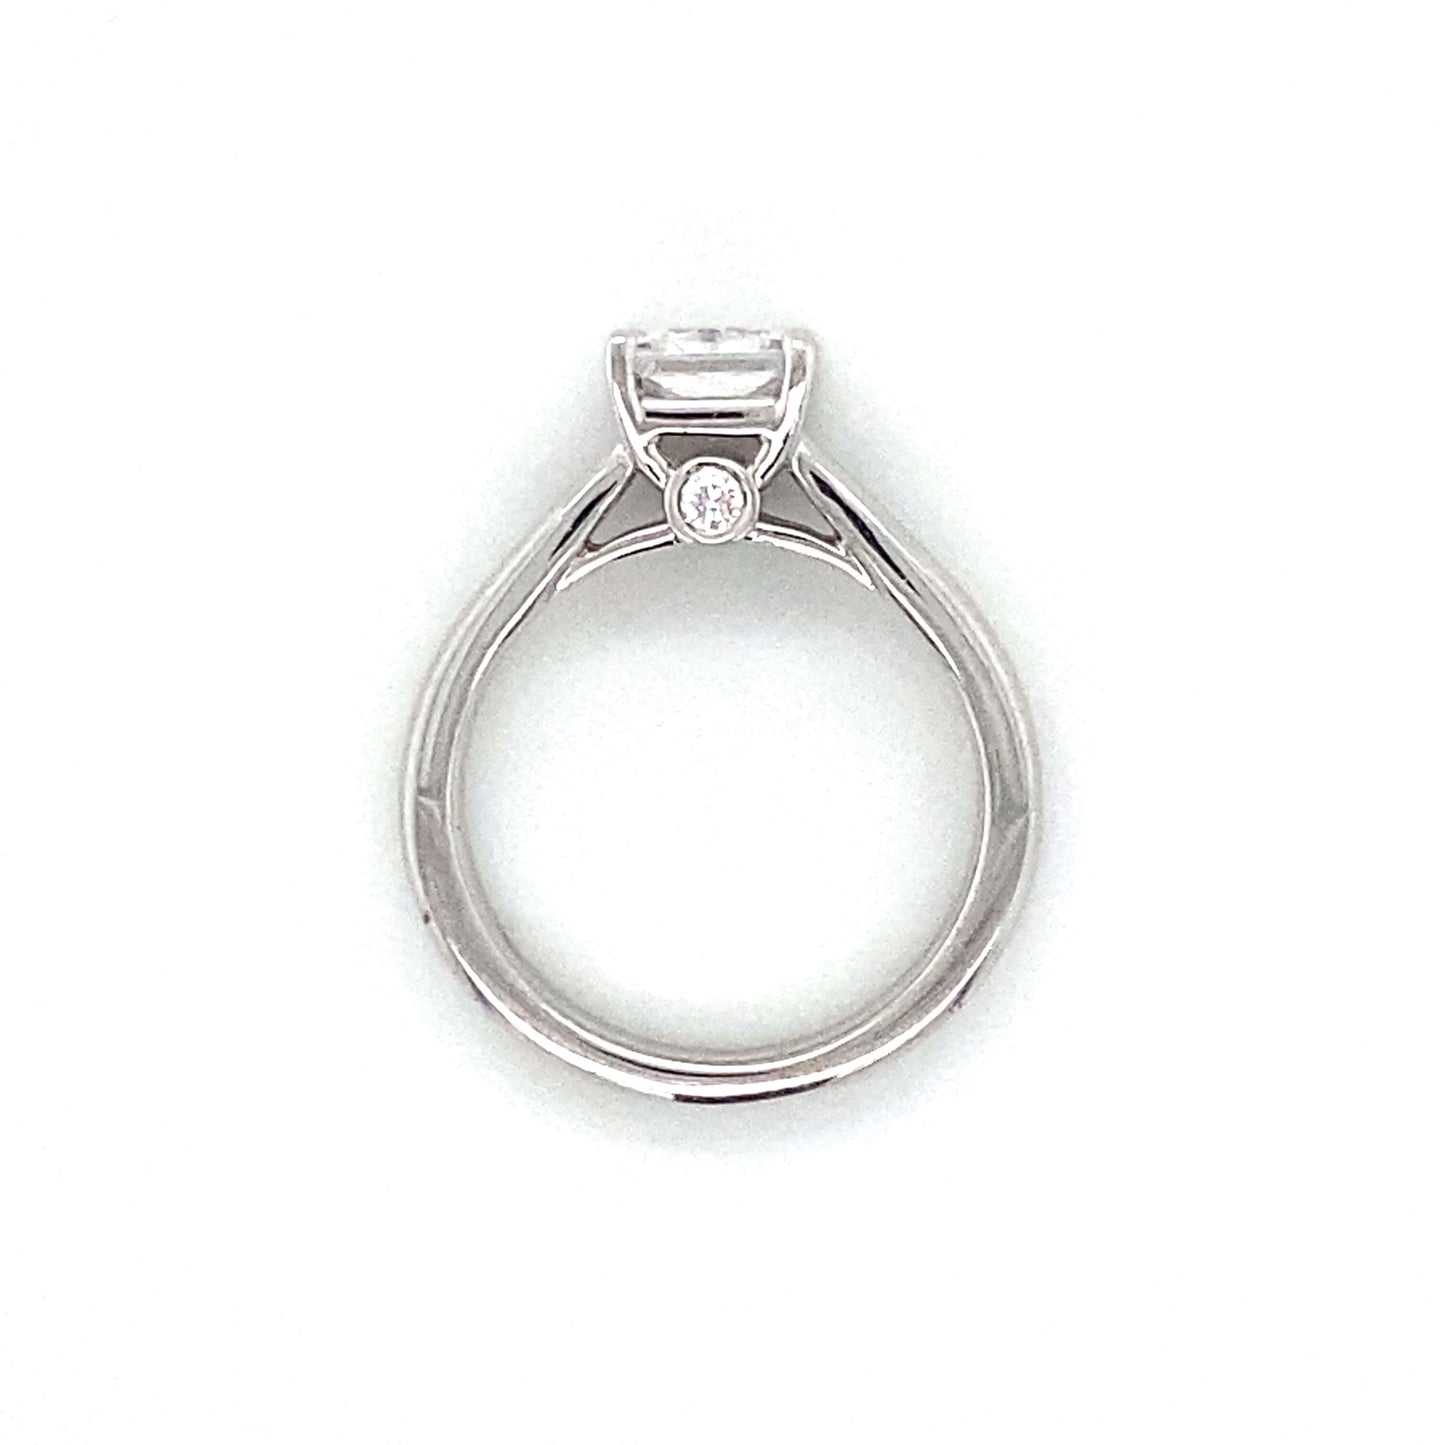 Ritani Solitaire Engagement Ring in 14K White Gold